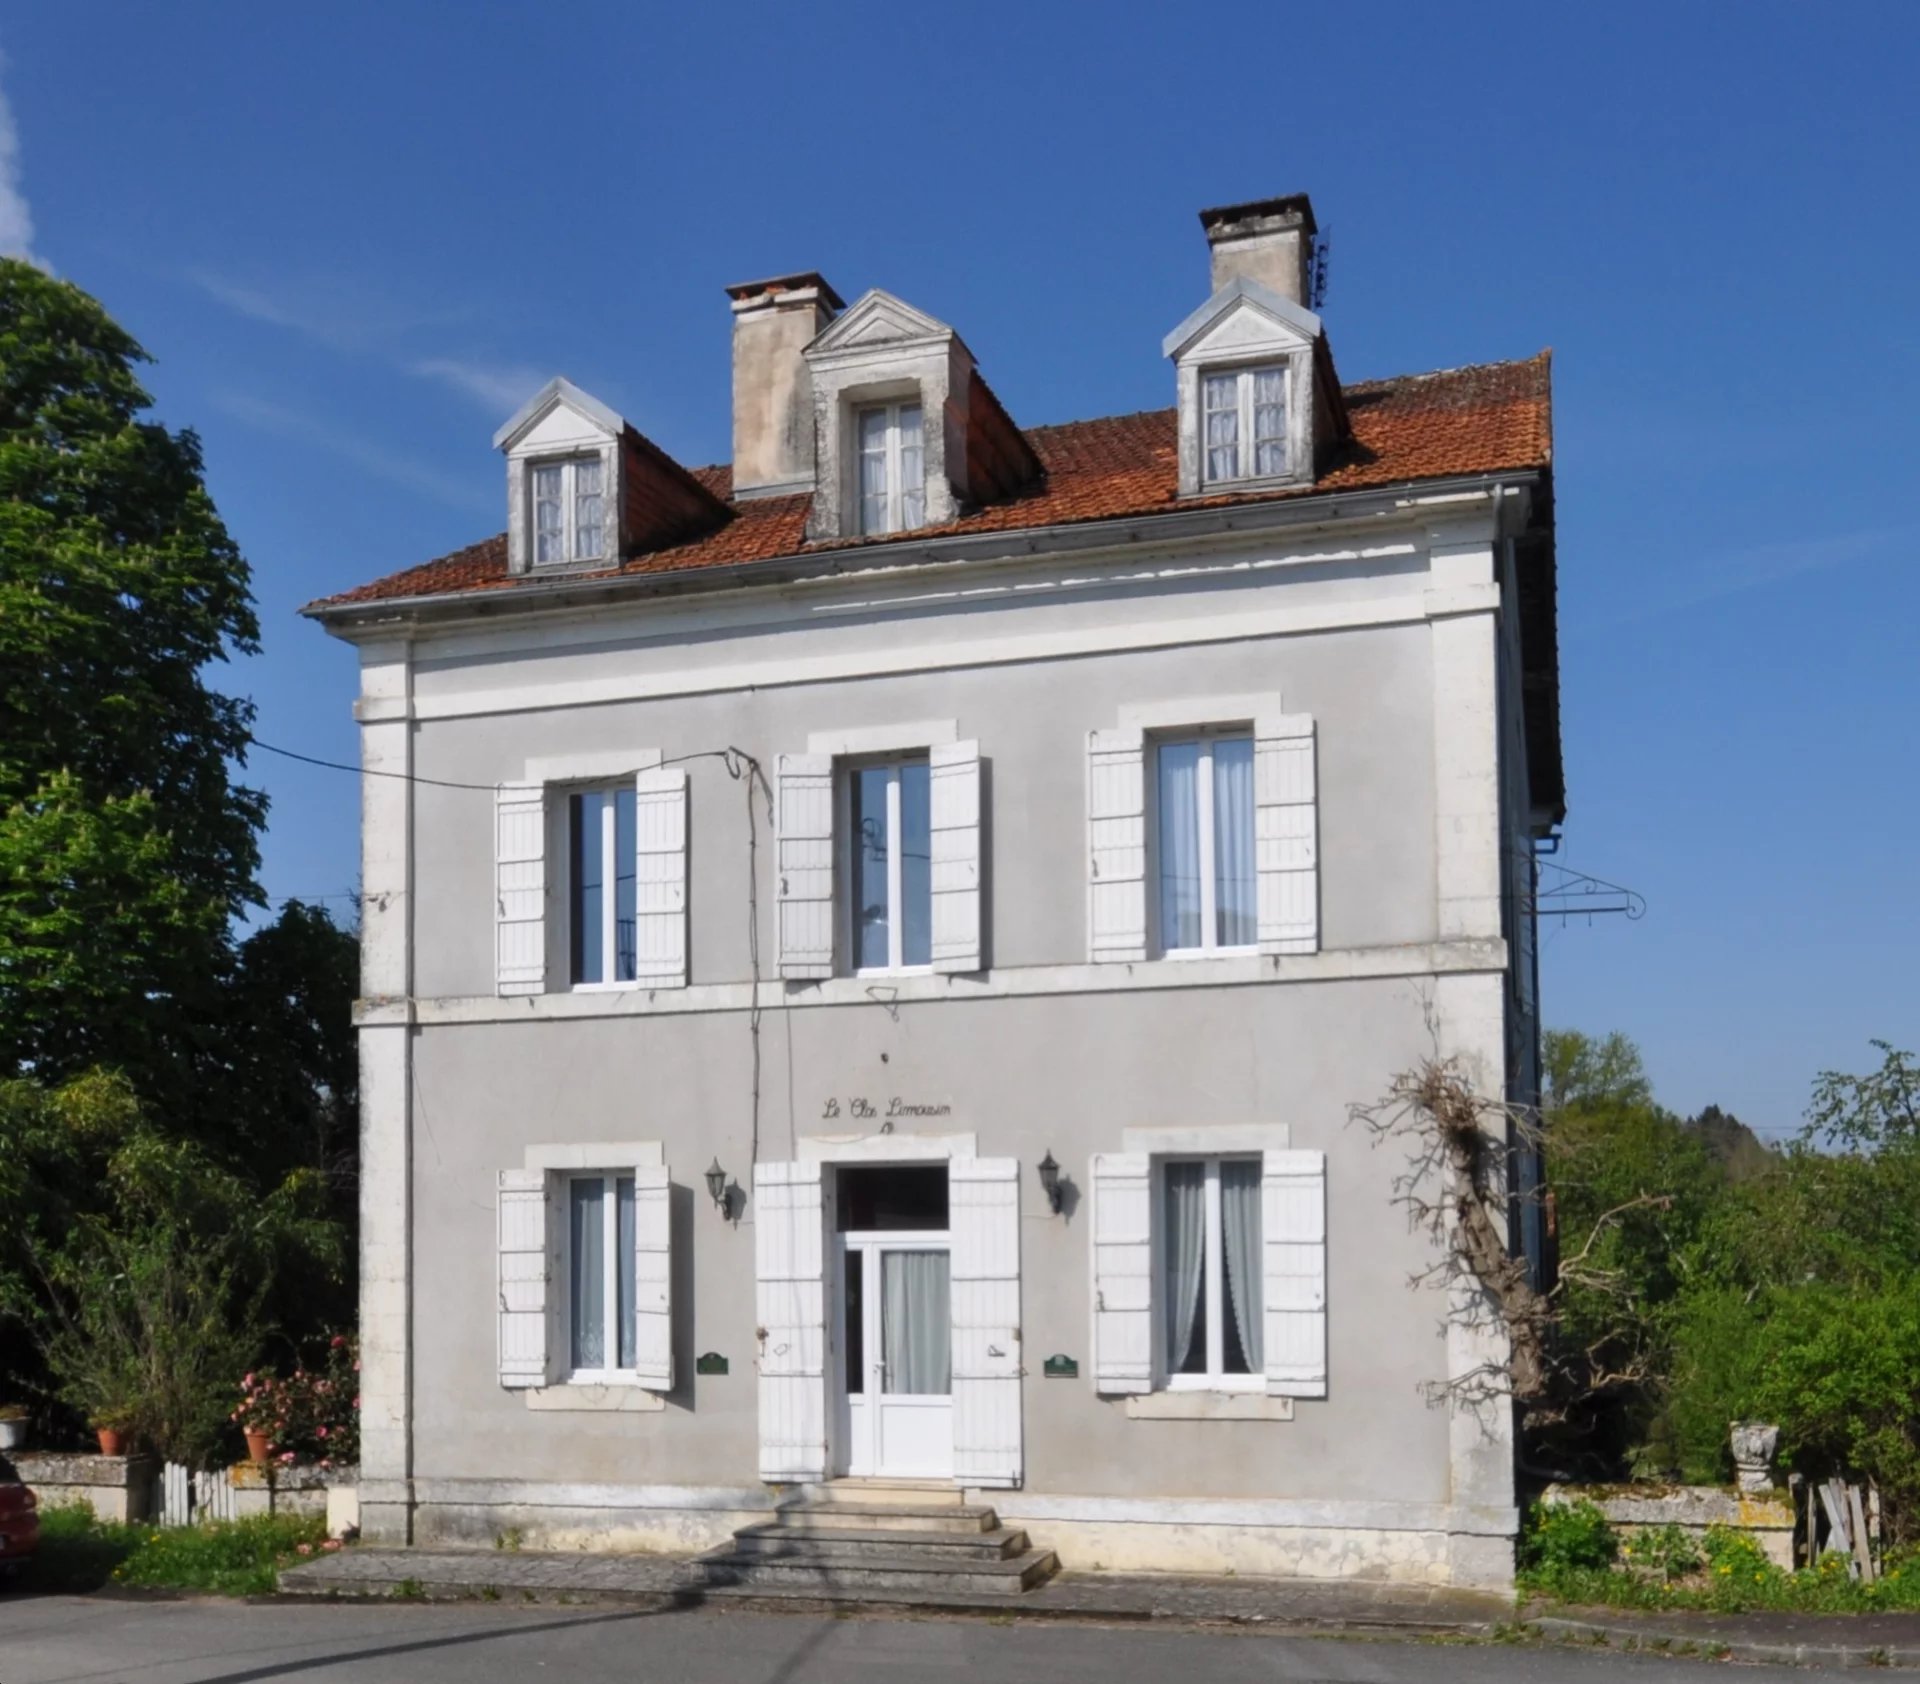 Lovely village house with 3 floors, a separate gite and attached gardens